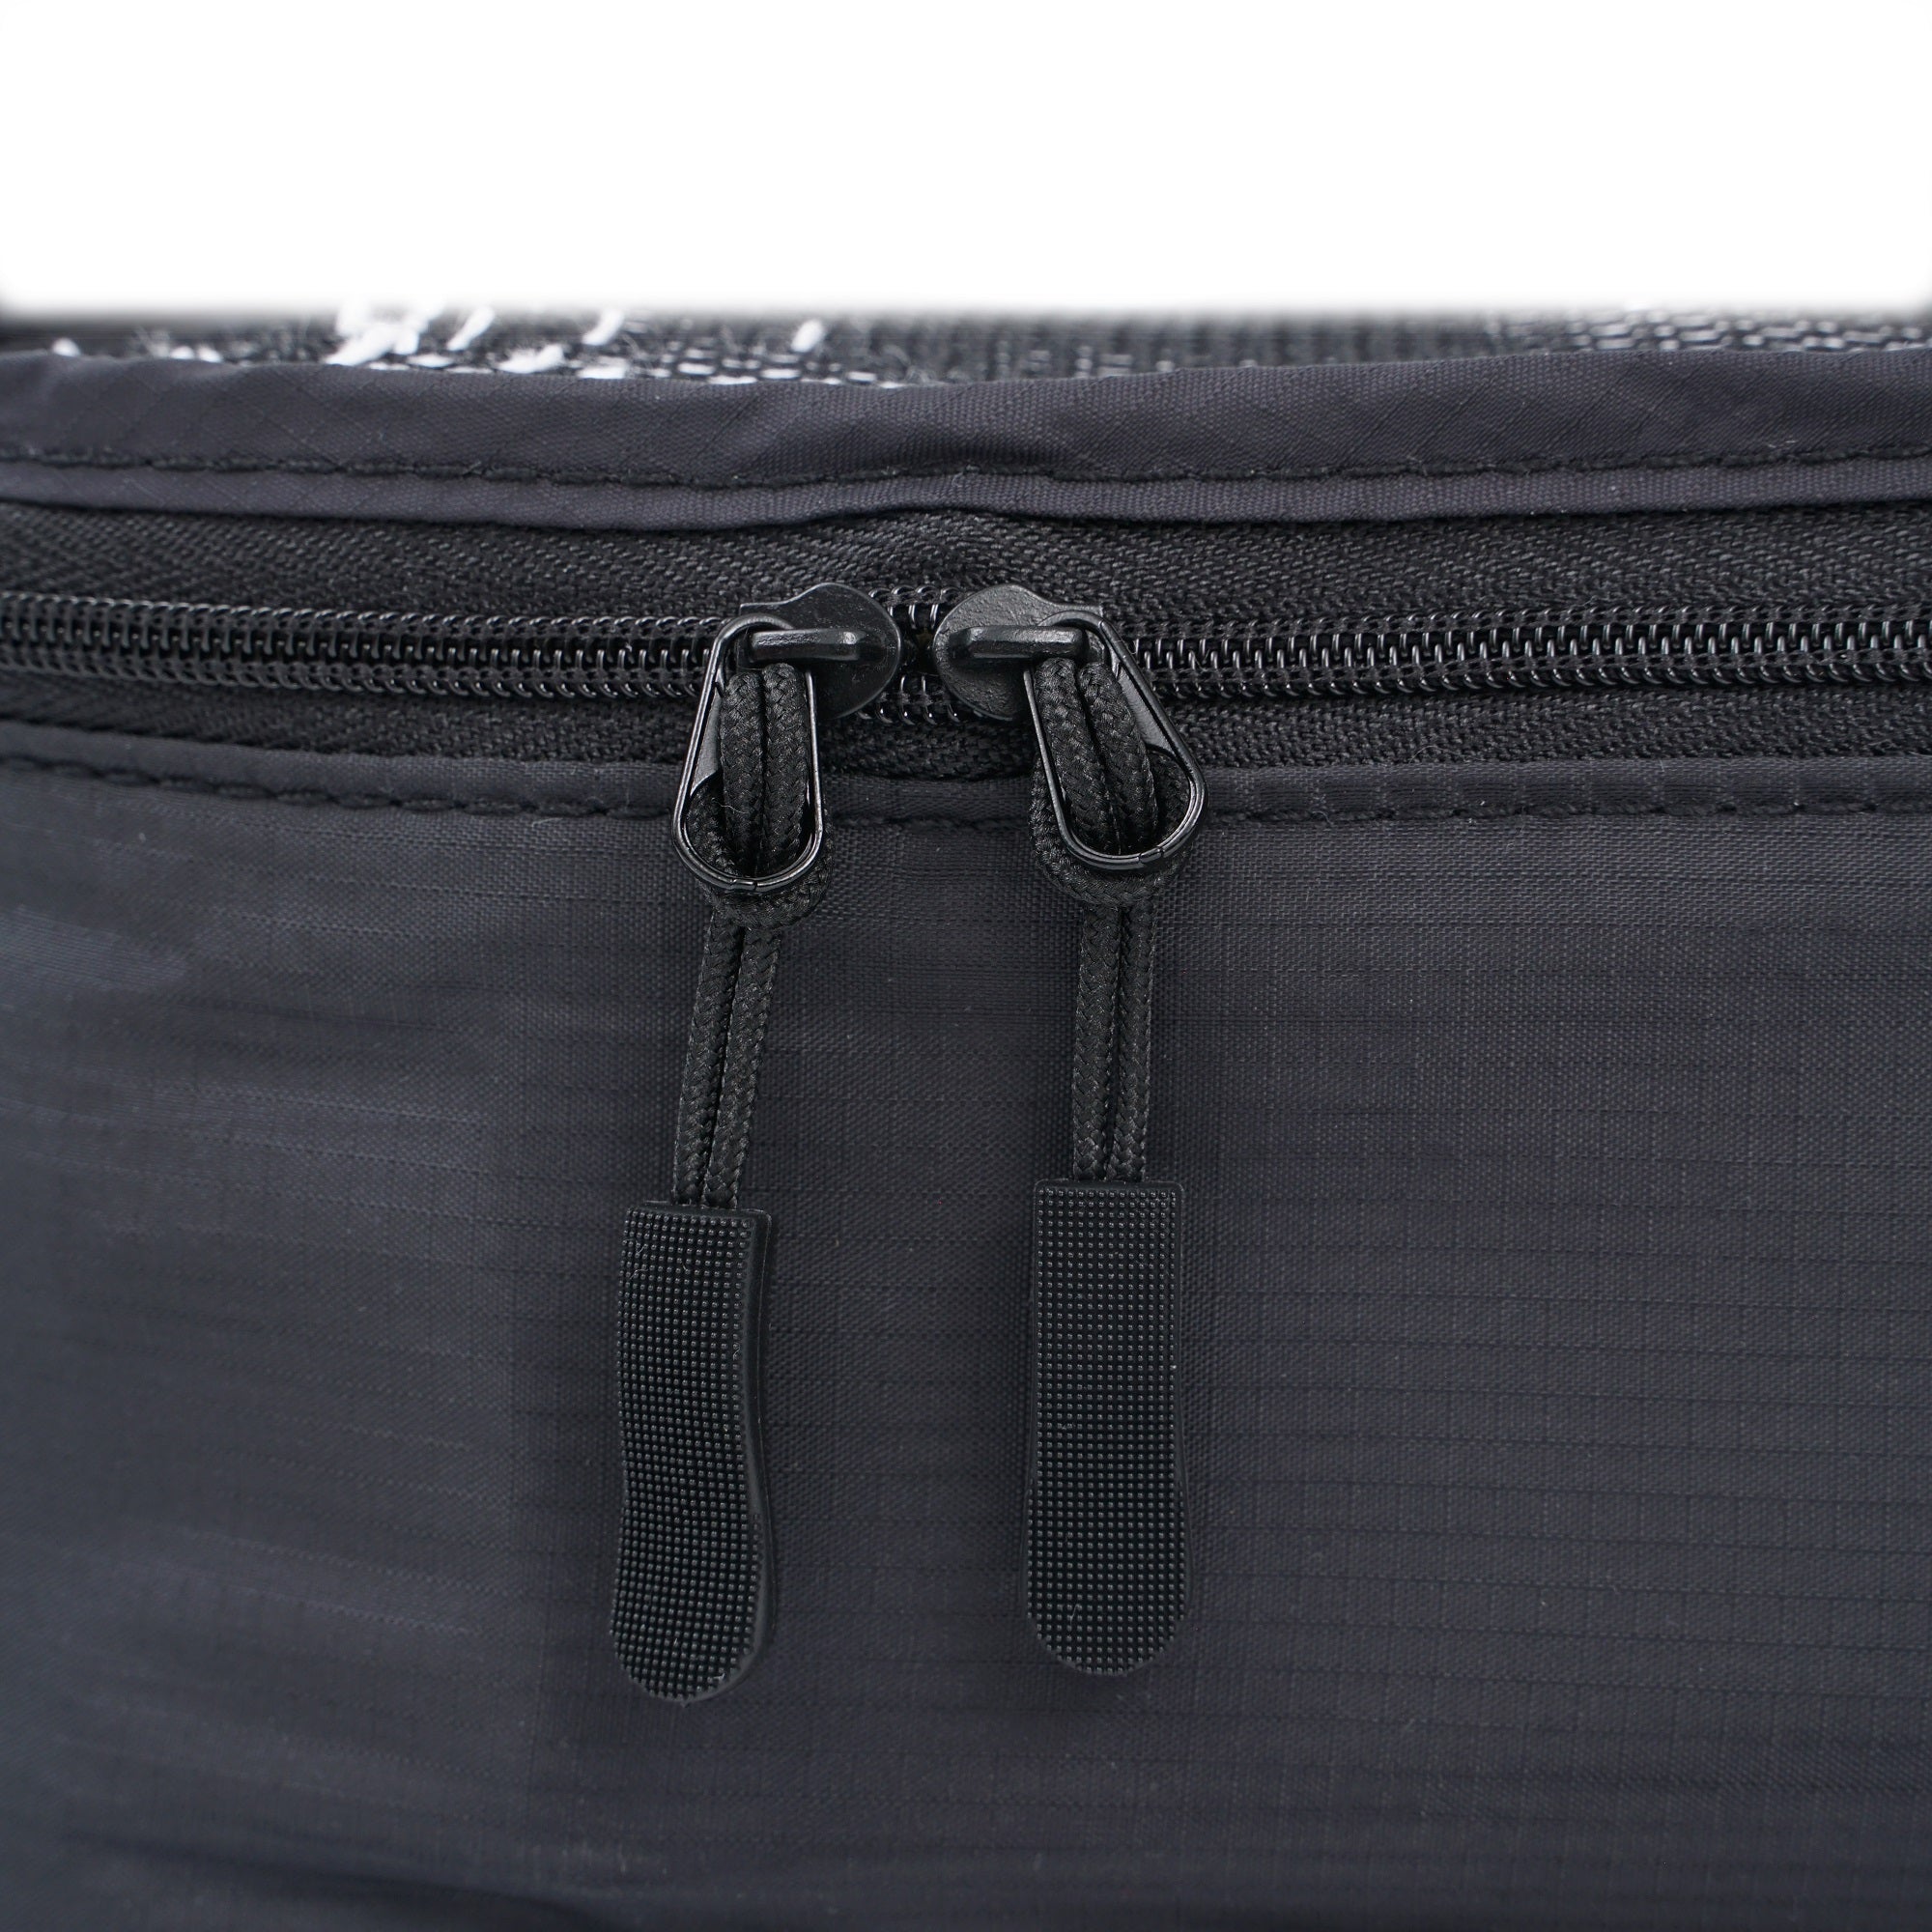 Black Foldable Packing cubes zips